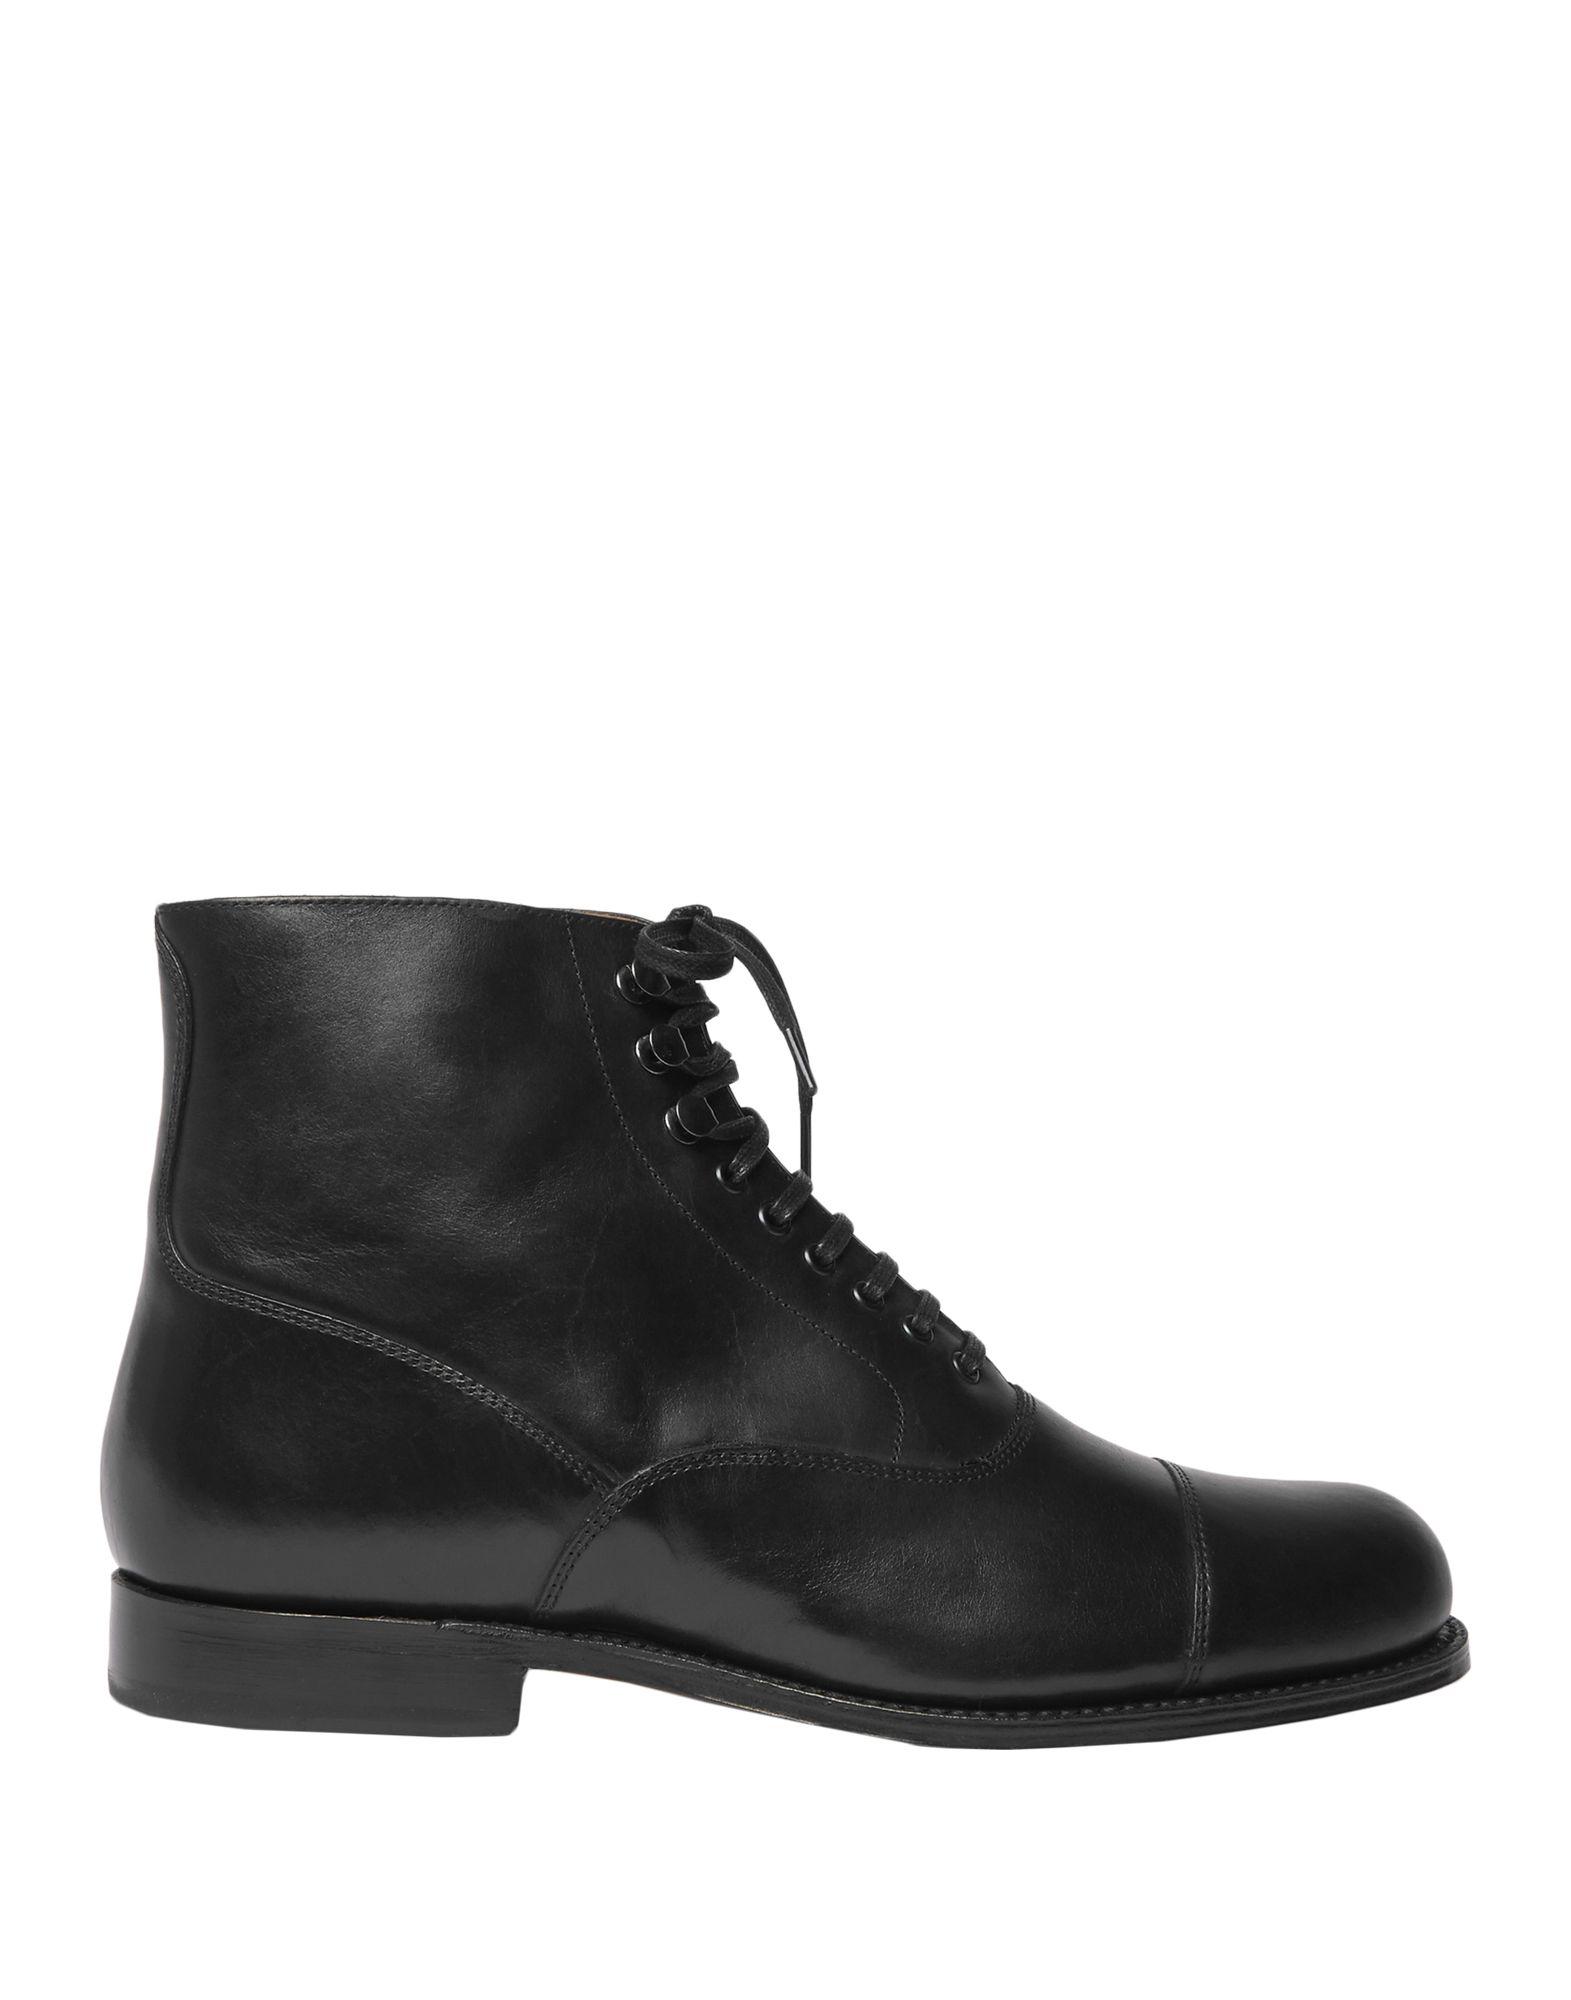 Grenson Ankle Boots in Black for Men - Lyst